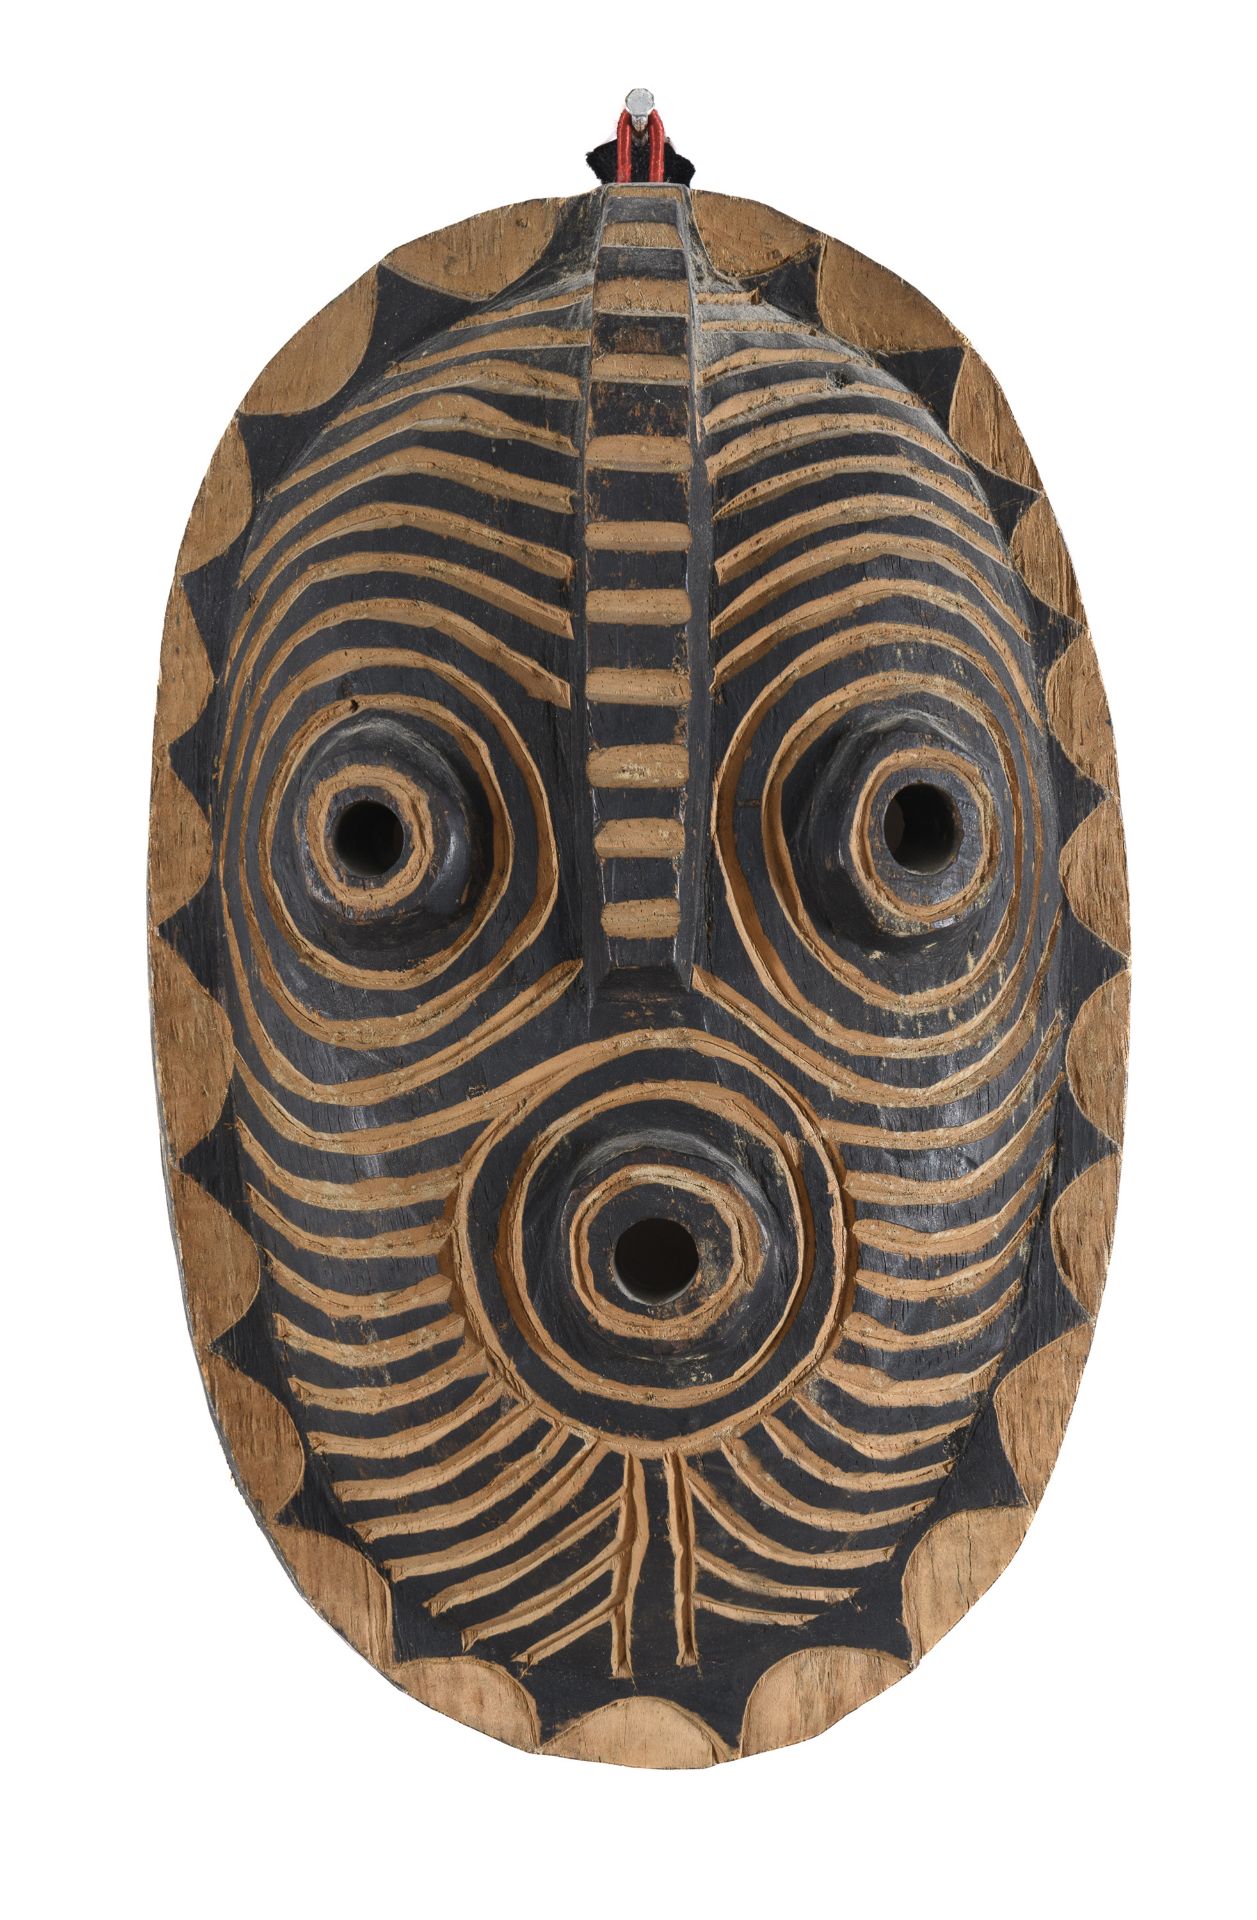 AN AFRICAN WOOD MASK 20TH CENTURY.